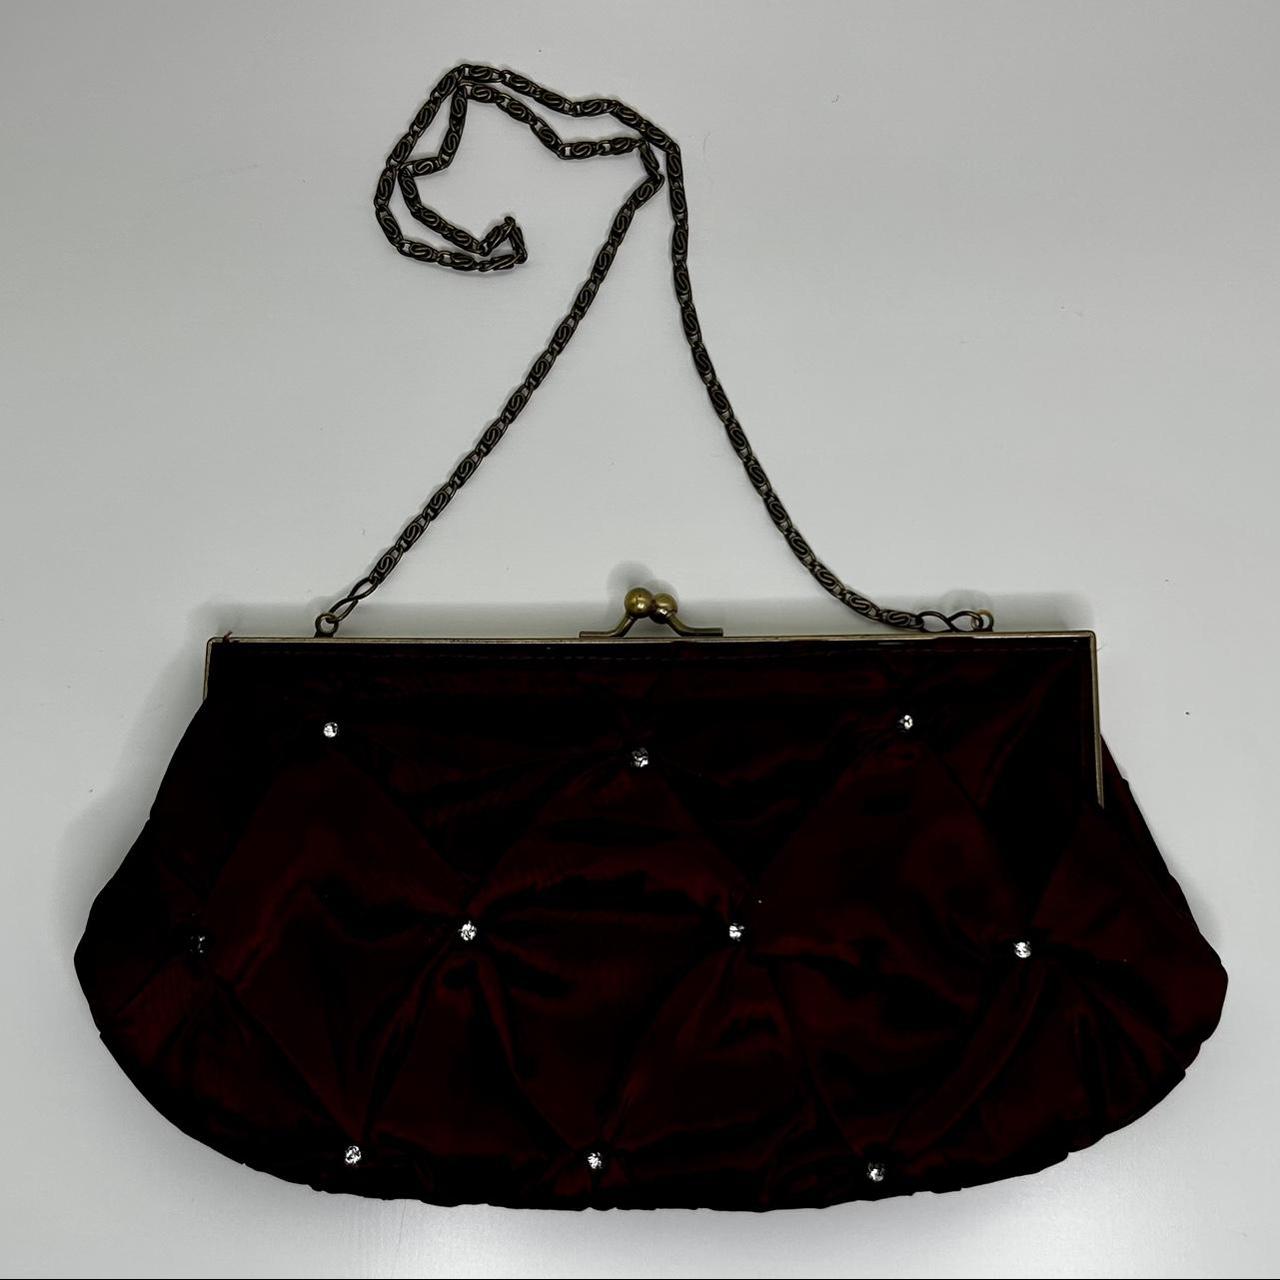 Beguiling Maroon Color Fancy Fabric Party Style Clutch Purses